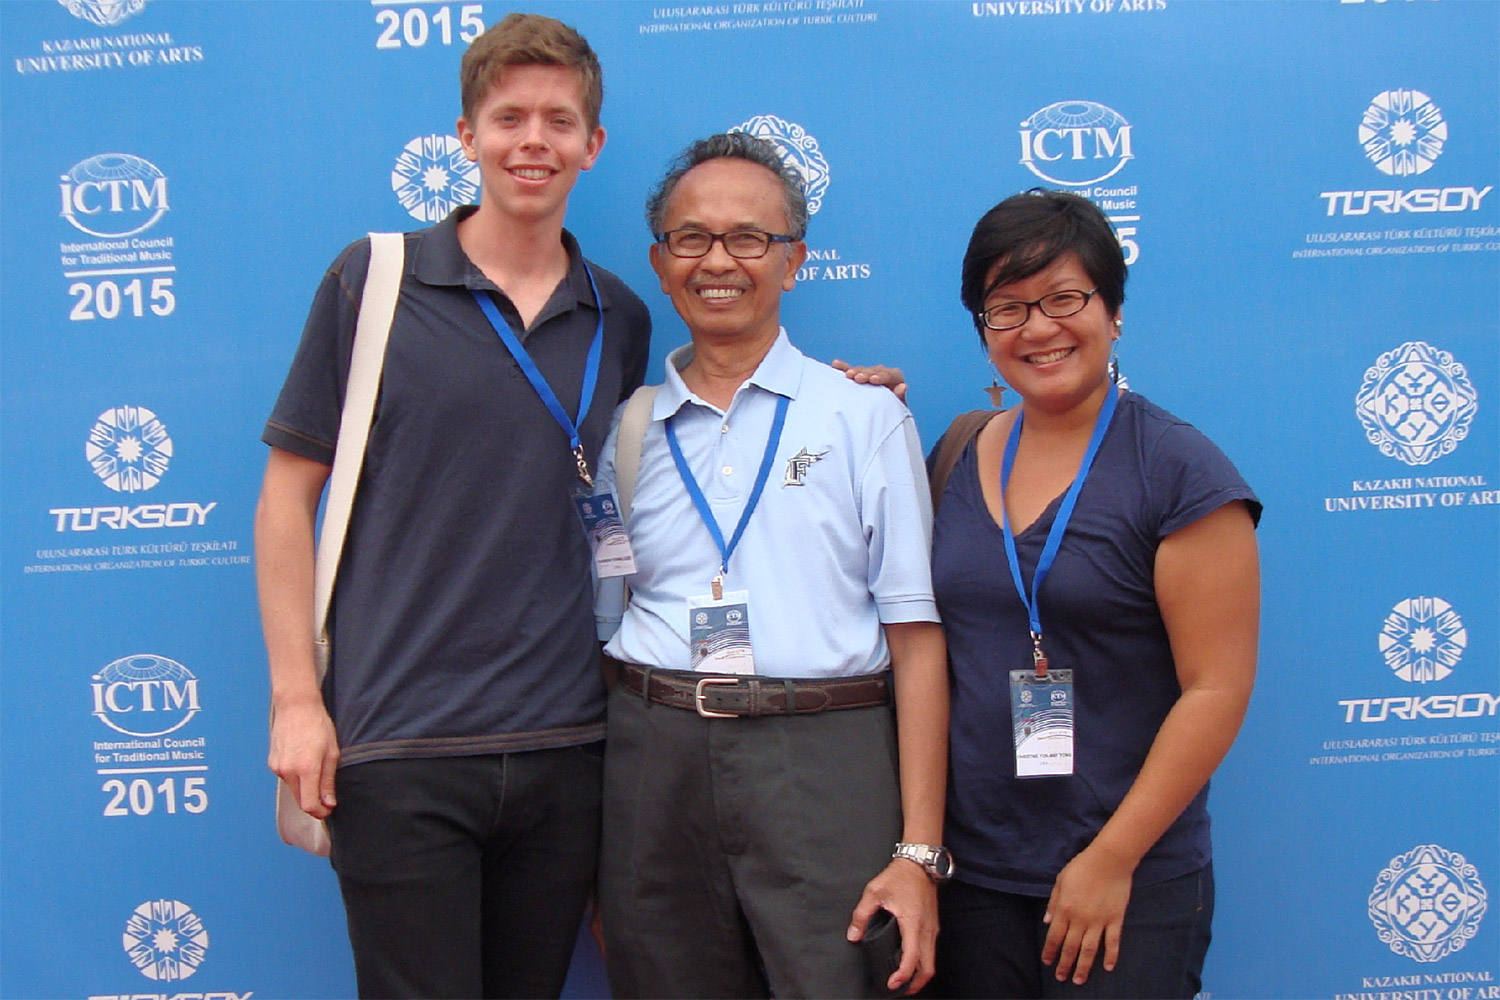 PhD candidate Ander Terwilliger, University Professor of Music Sumarsam and PhD candidate Christine Yong attended the International Council for Traditional Music conference in Astana, Kazakhstan.